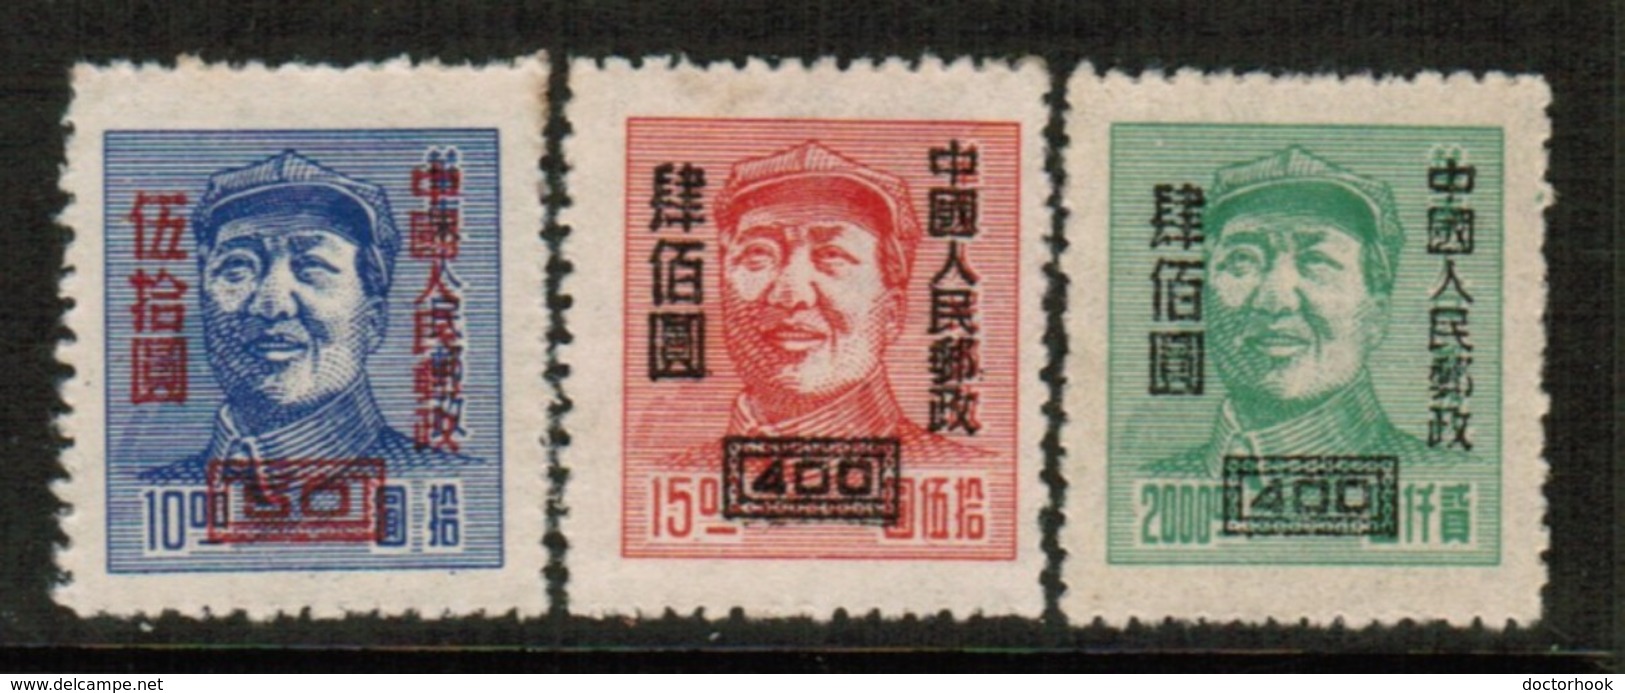 PEOPLES REPUBLIC Of CHINA  Scott # 82-4* VF UNUSED NO GUM AS ISSUED (Stamp Scan # 508) - Unused Stamps